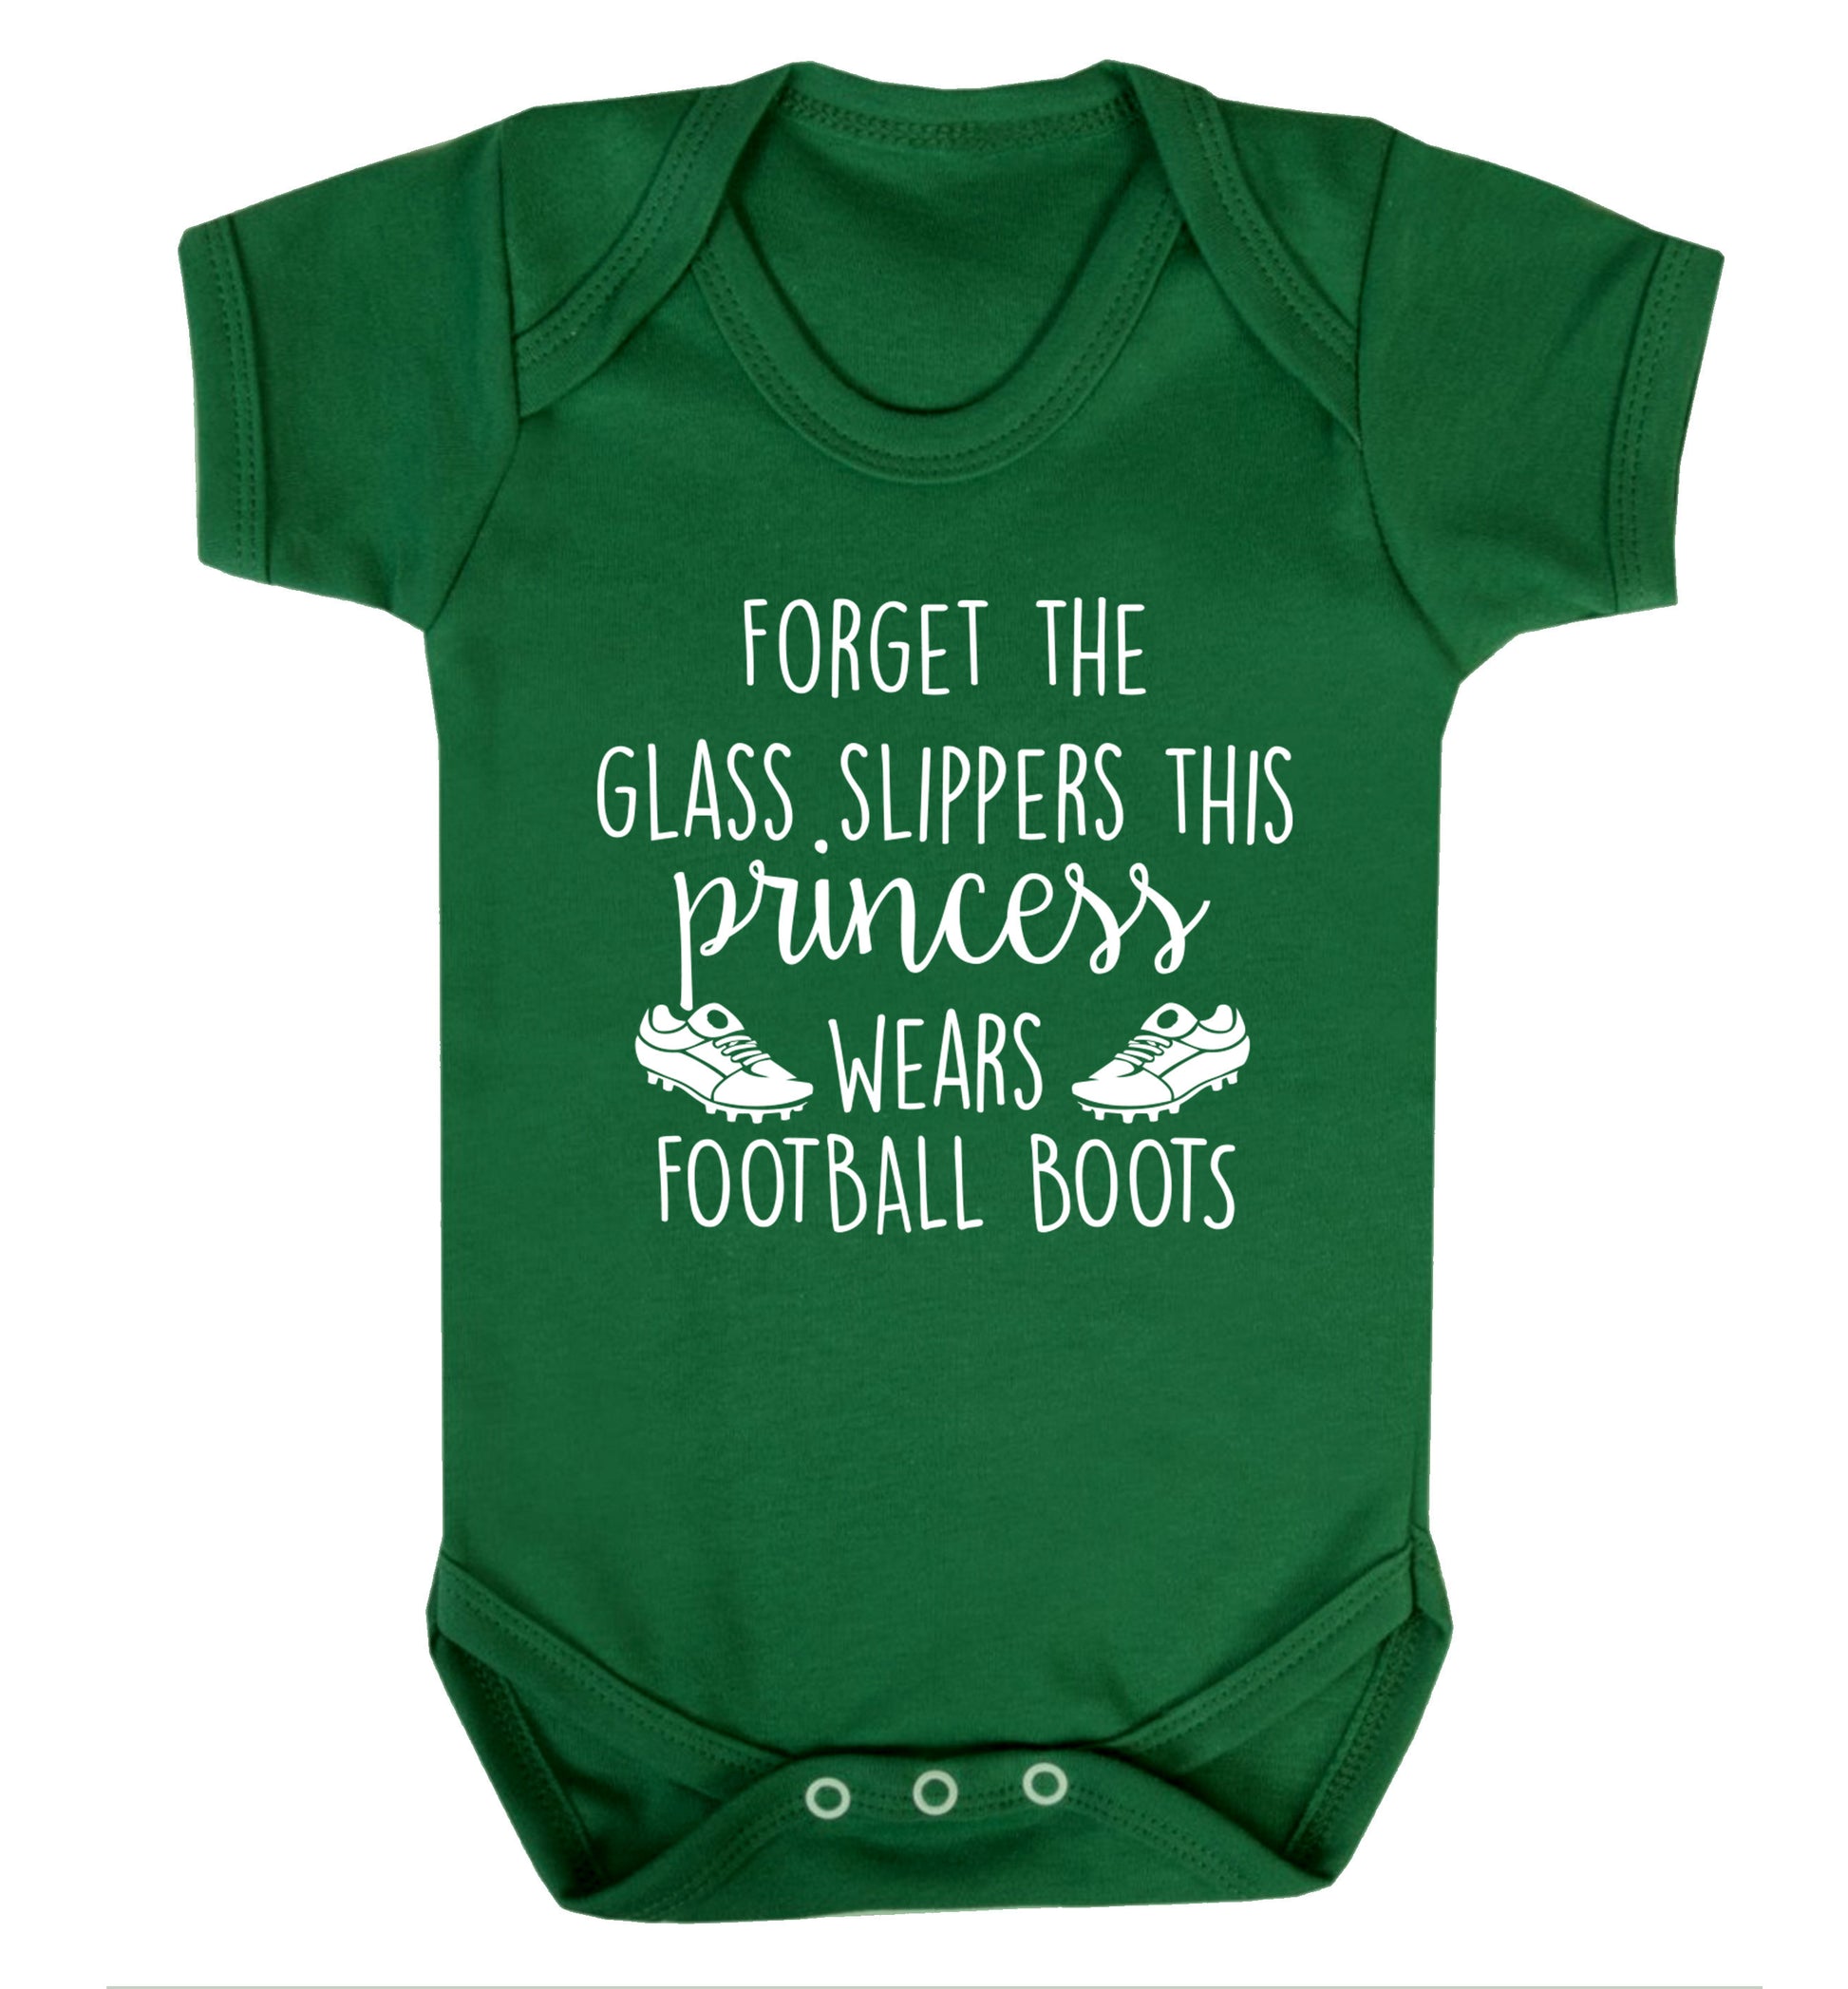 Forget the glass slippers this princess wears football boots Baby Vest green 18-24 months